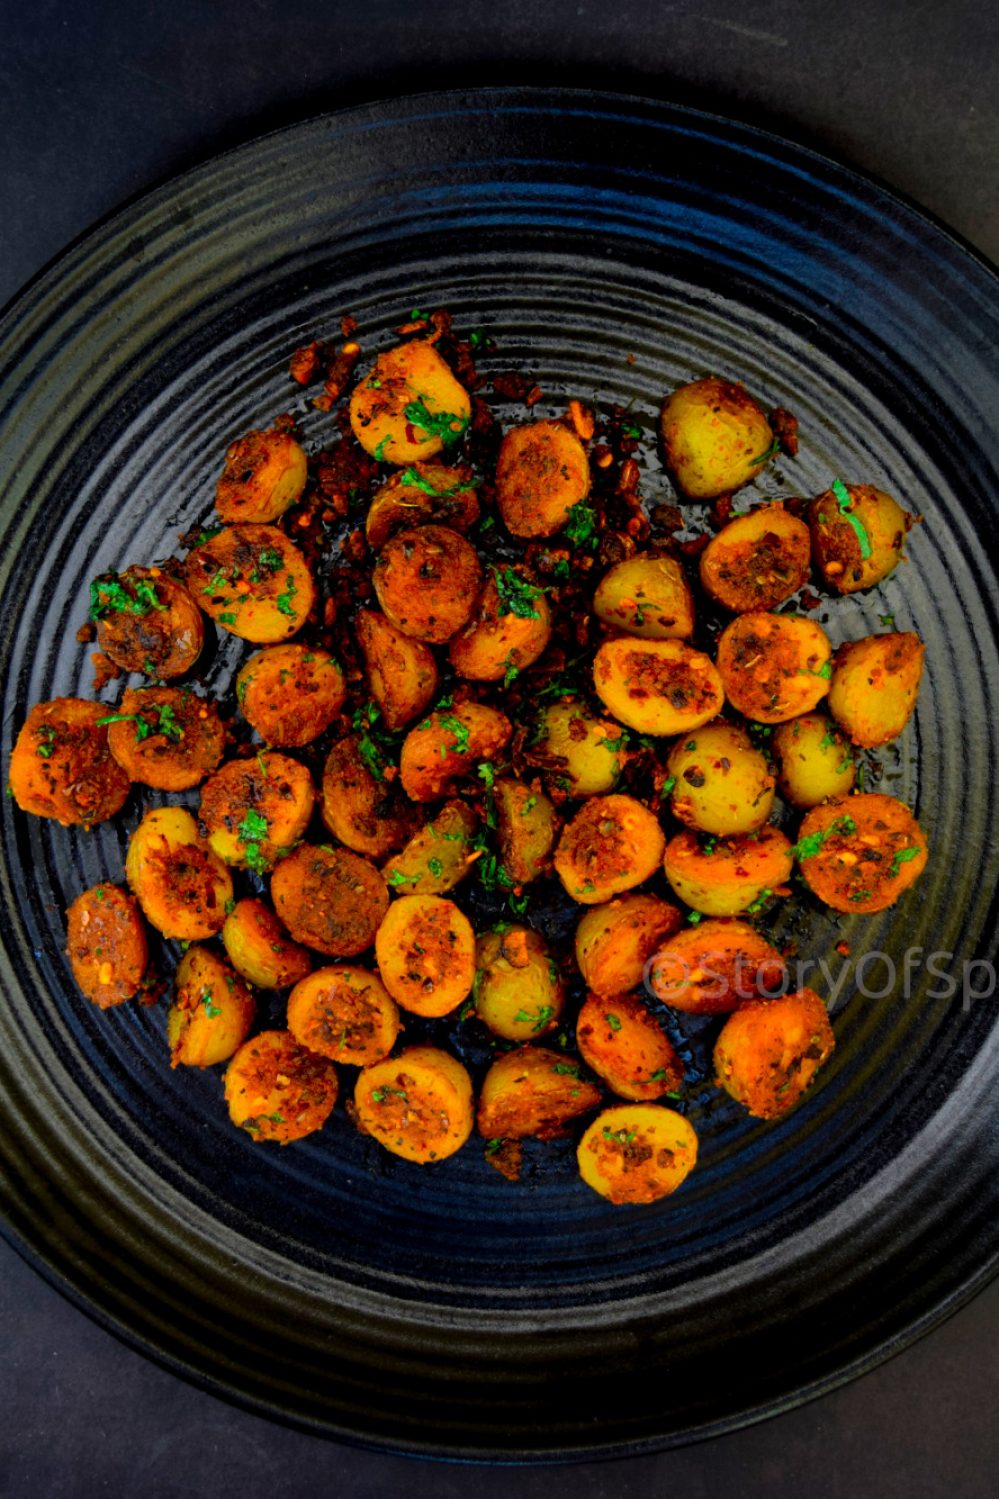 Roasted-Garlic-Potatoes-Story-of-spices